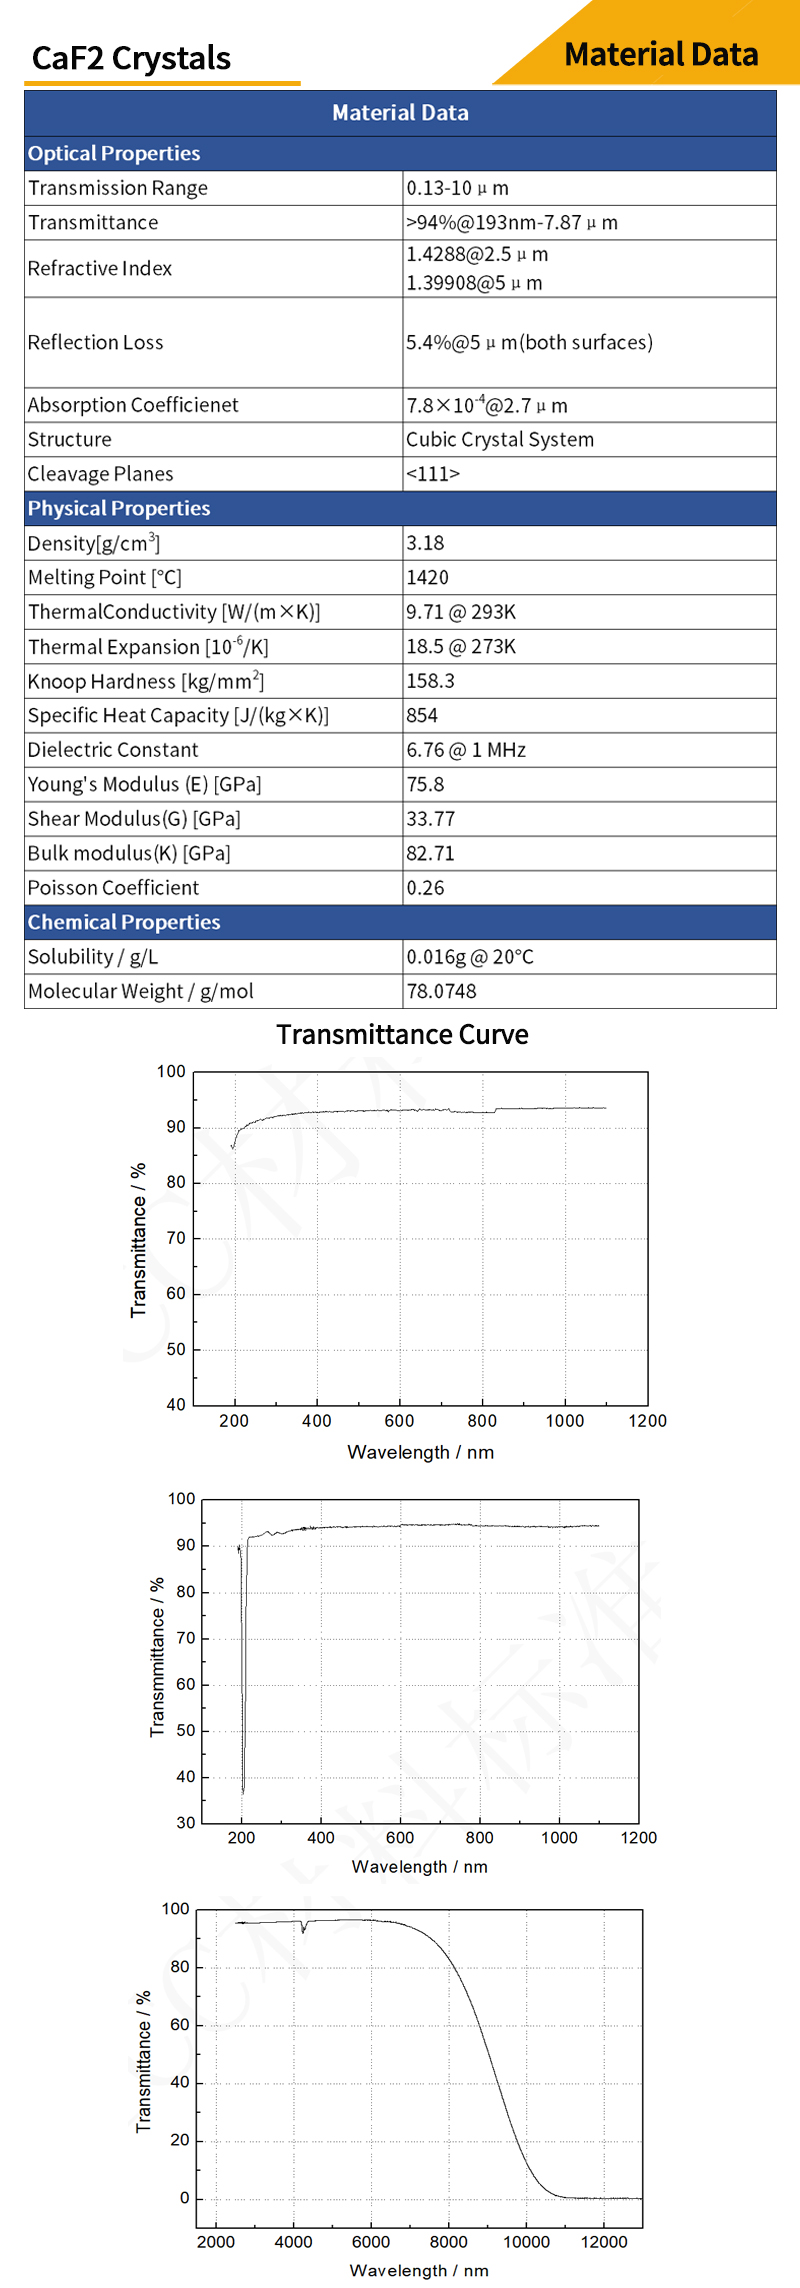 Polycrystalline calcium fluoride crystals material data and transmittance curves